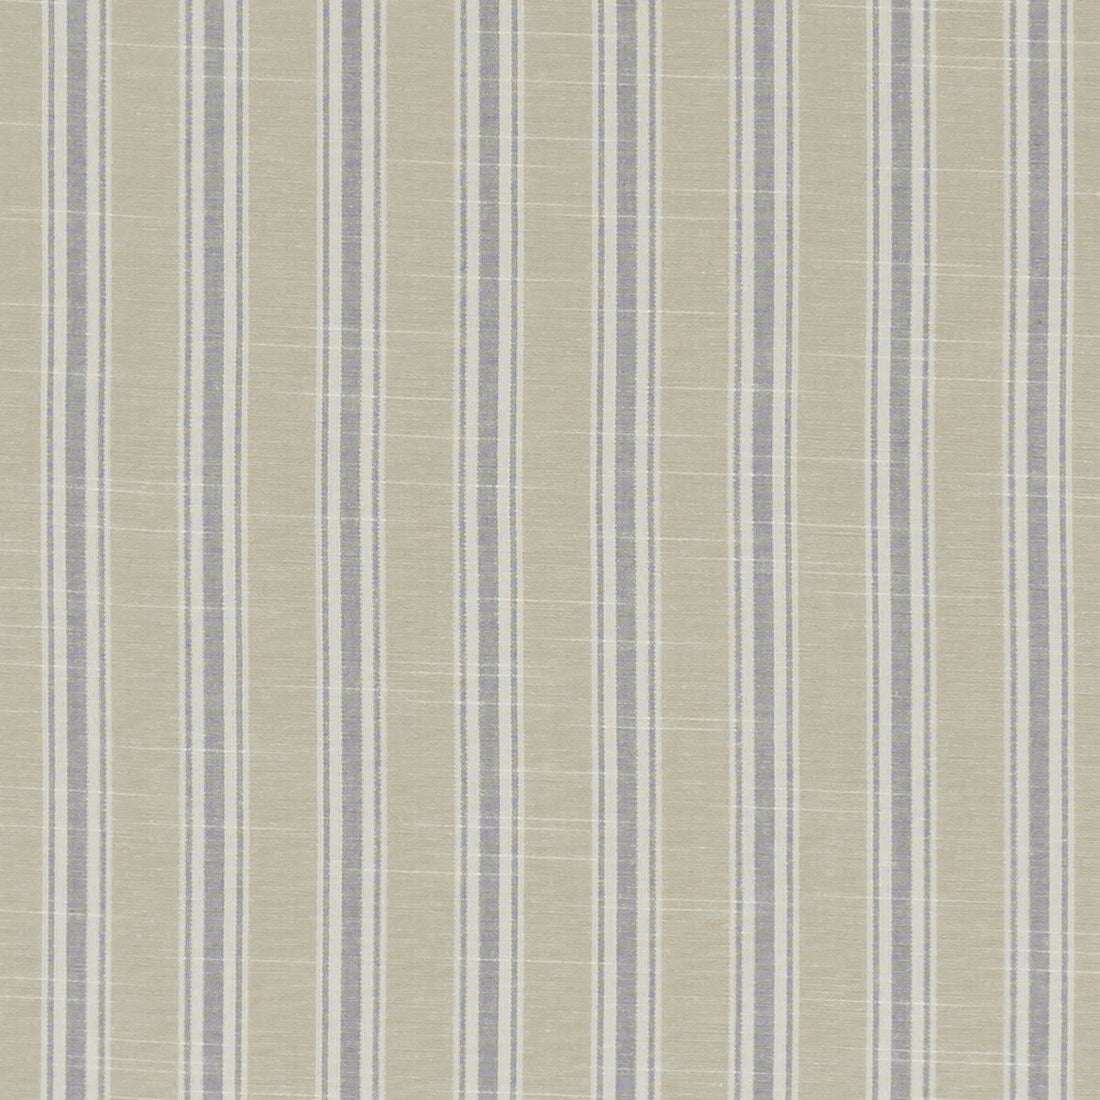 Thornwick fabric in mineral color - pattern F1311/06.CAC.0 - by Clarke And Clarke in the Bempton By Studio G For C&amp;C collection